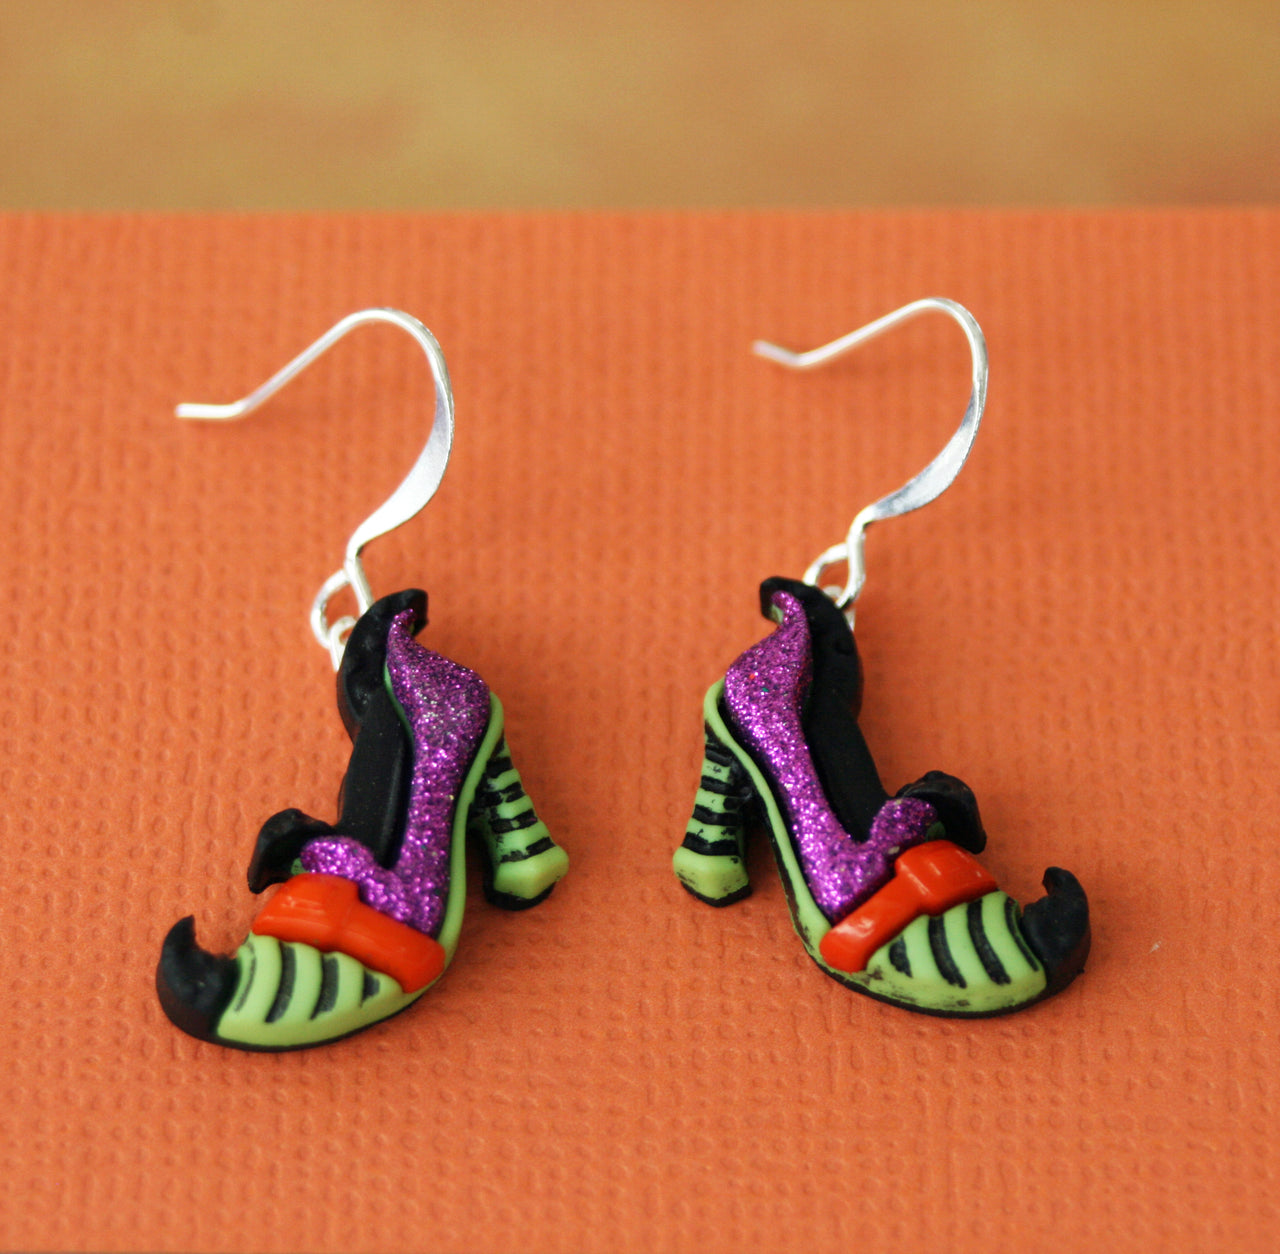 Witch's shoes earrings